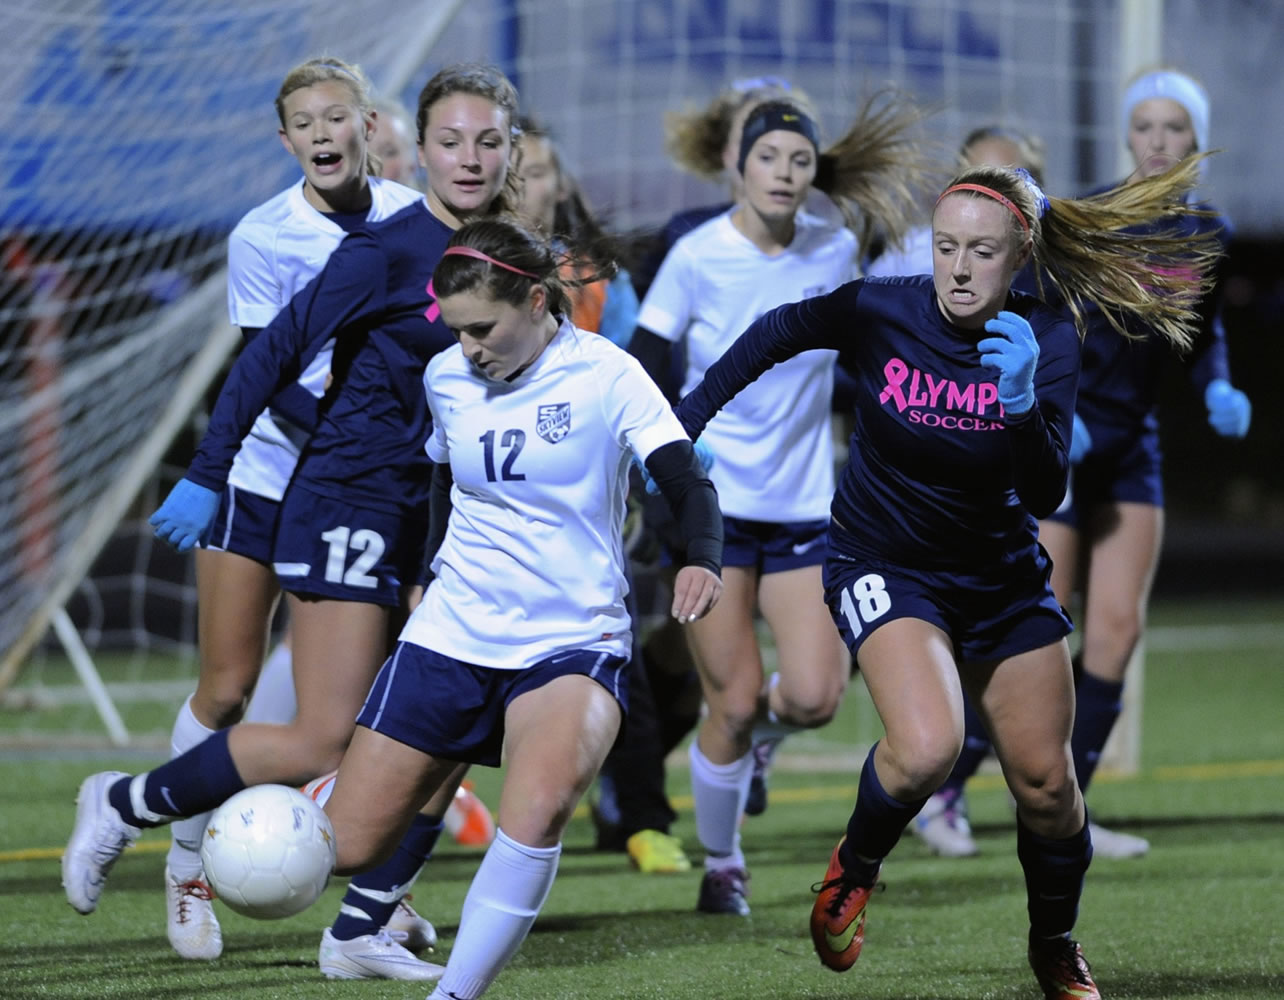 Olympia High School's Brooklyn Hooper (18) ) defends a clearance by Skyview's Sydnee Smith (12) in a girls' 4A state soccer playoff game at Kiggins Bowl on Wednesday Nov. 12, 2014. Olympia won on penalty kicks.